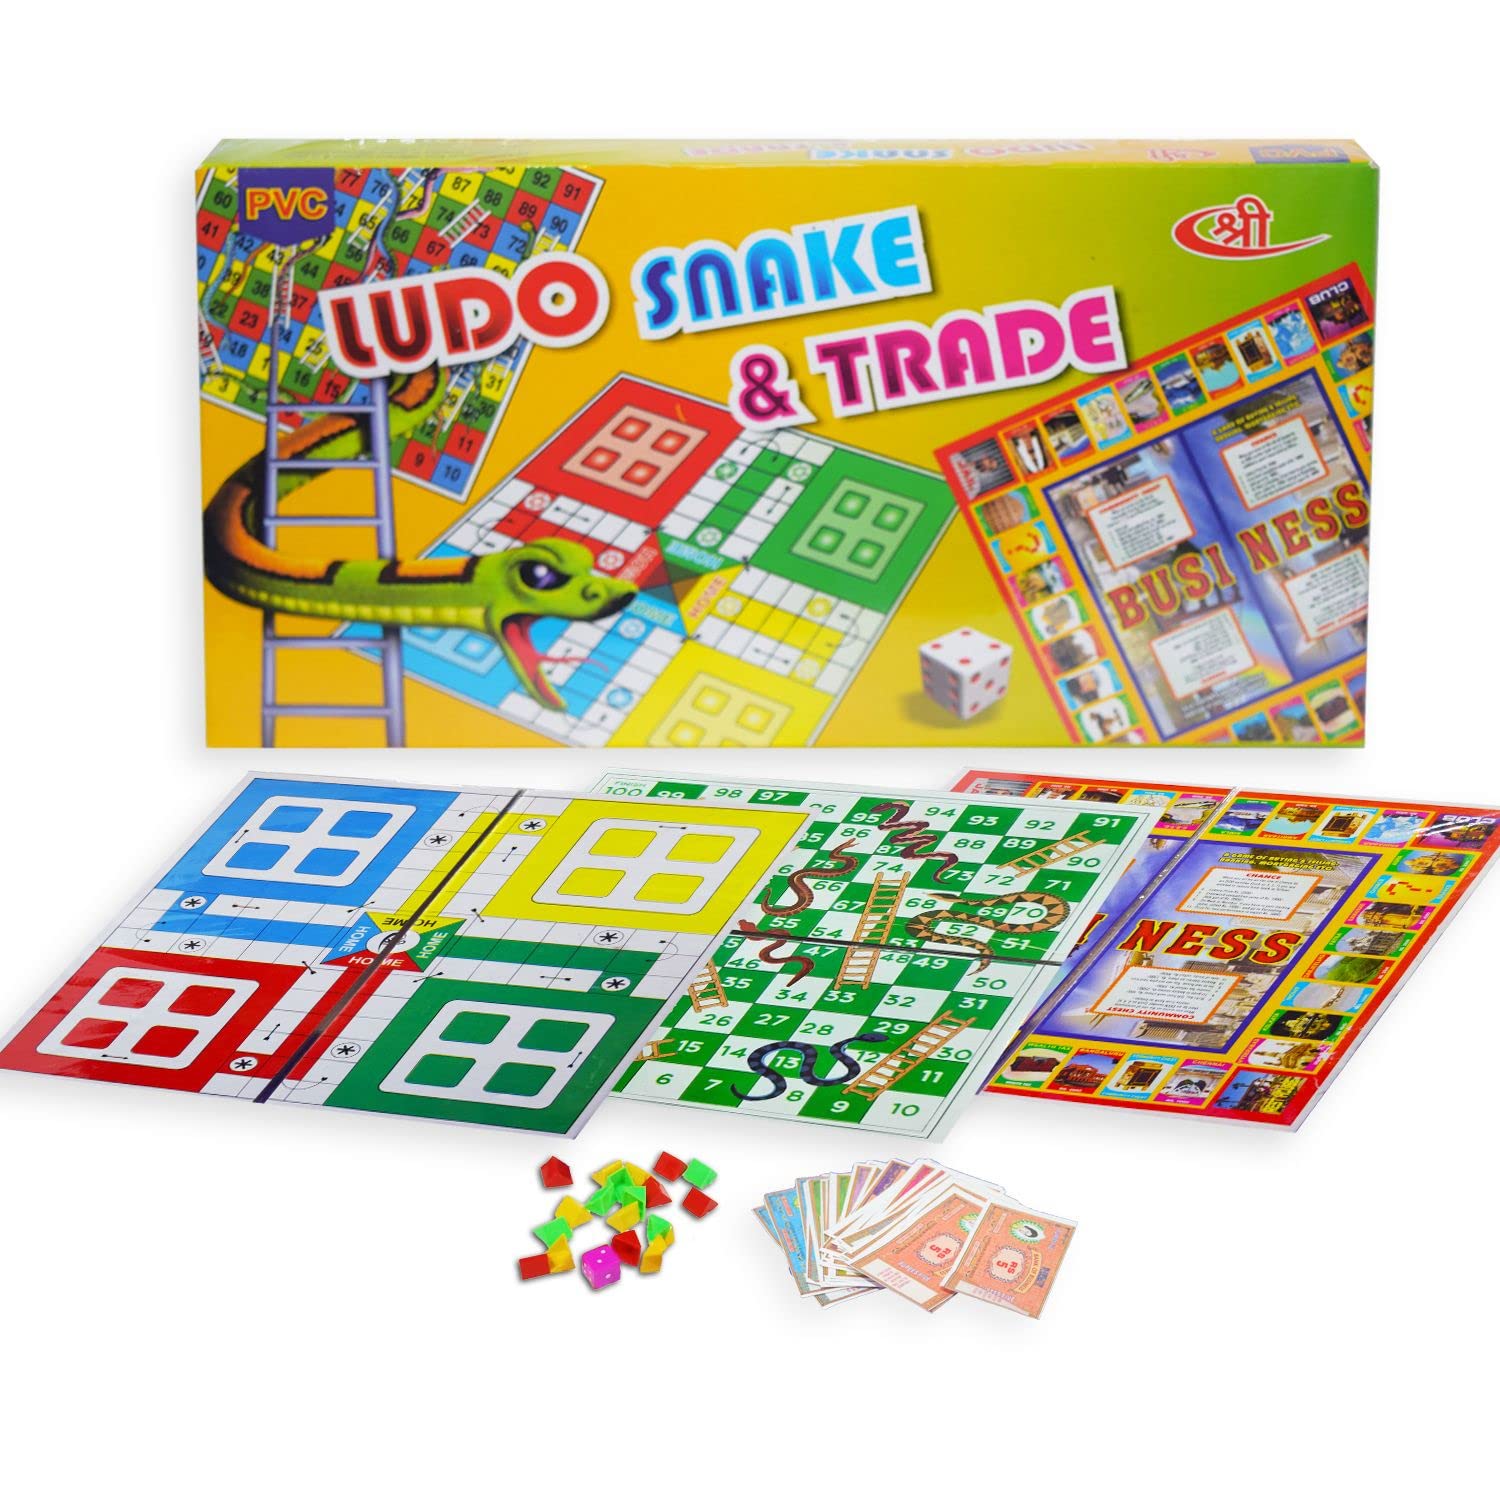 Ludo,Snake & Ladder and Business trade Board Games